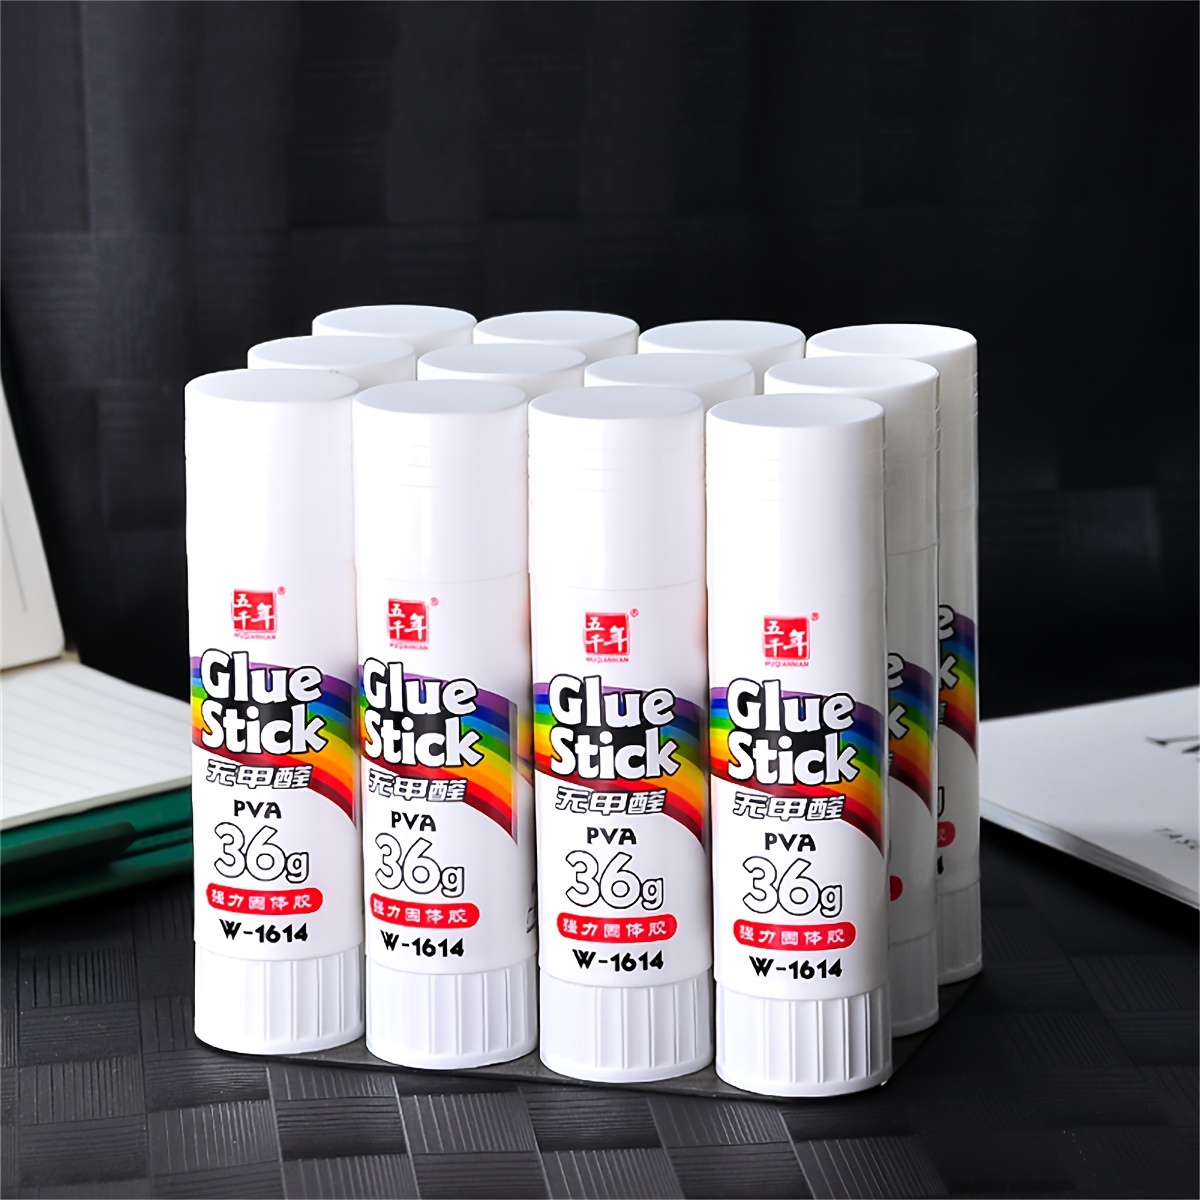 

8-pack High Viscosity Solid Glue Sticks, 9g/15g/21g/36g, & Odorless - Perfect For School Supplies, Crafts & Office Use, Non-toxic Adhesive By Wuqiannian